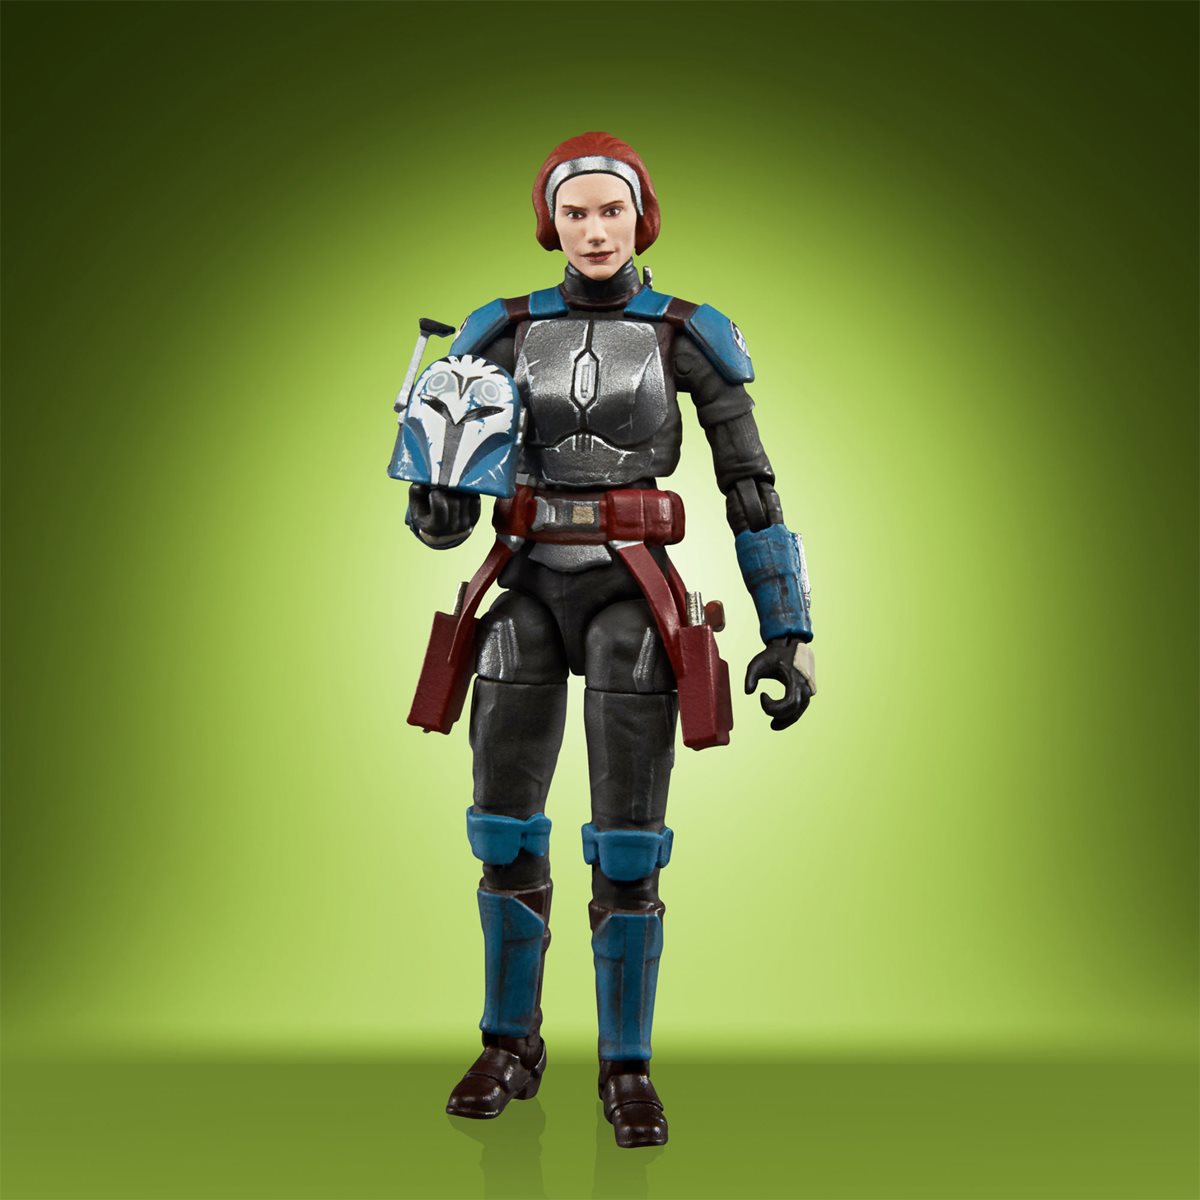 Toys for Kids 4 and Up Star Wars Retro Collection Bo-Katan Kryze Toy 3.75-Inch-Scale The Mandalorian Collectible Action Figure F4460 